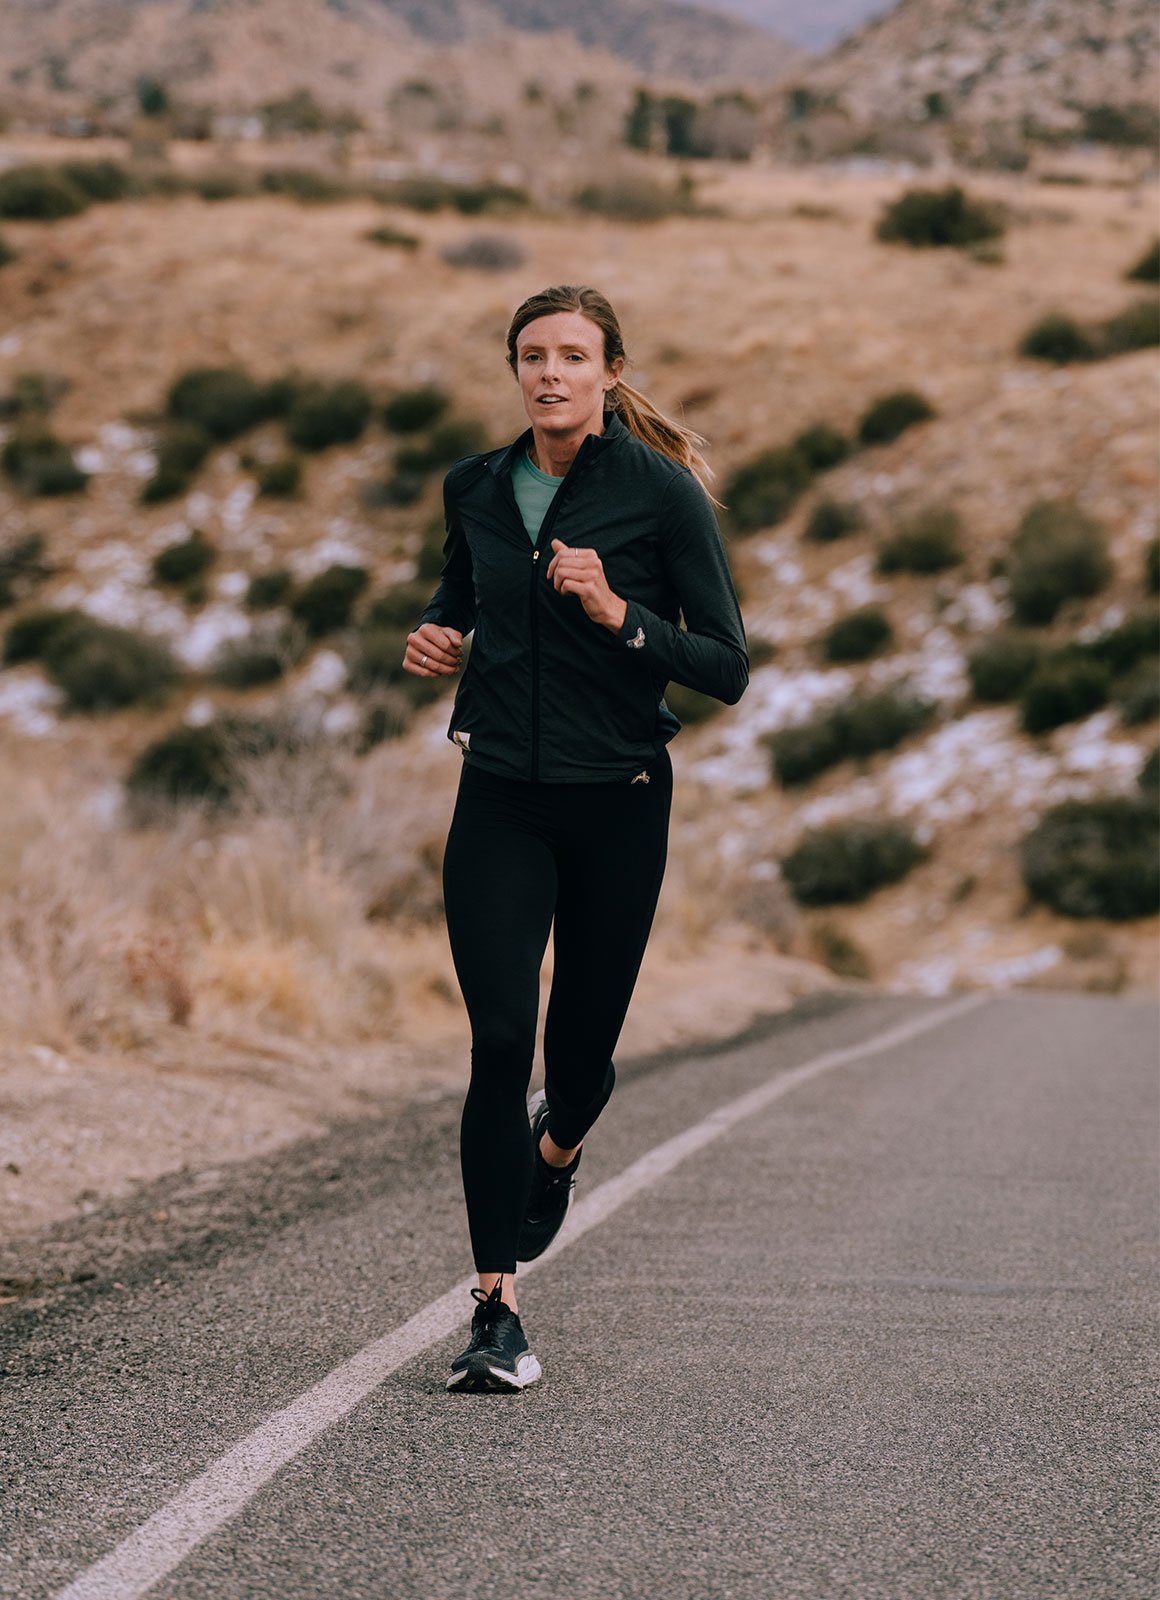 Tracksmith: Long and Short Session Tights are Here